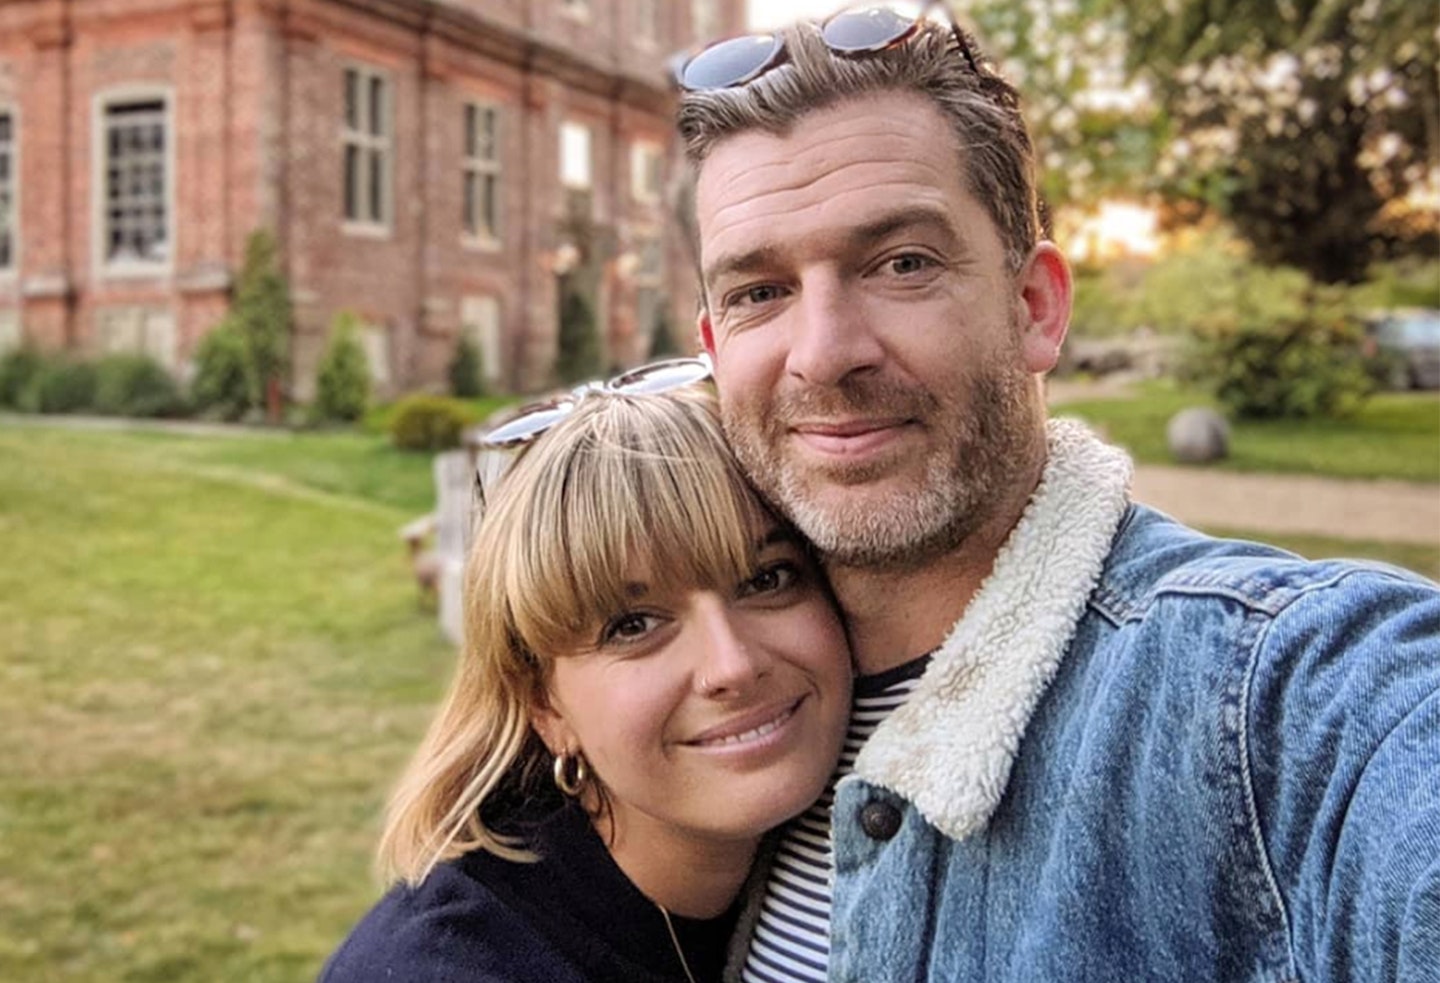 Simon Hooper says he is ‘angry and sad’ about his wife trolling mummy blogger accounts